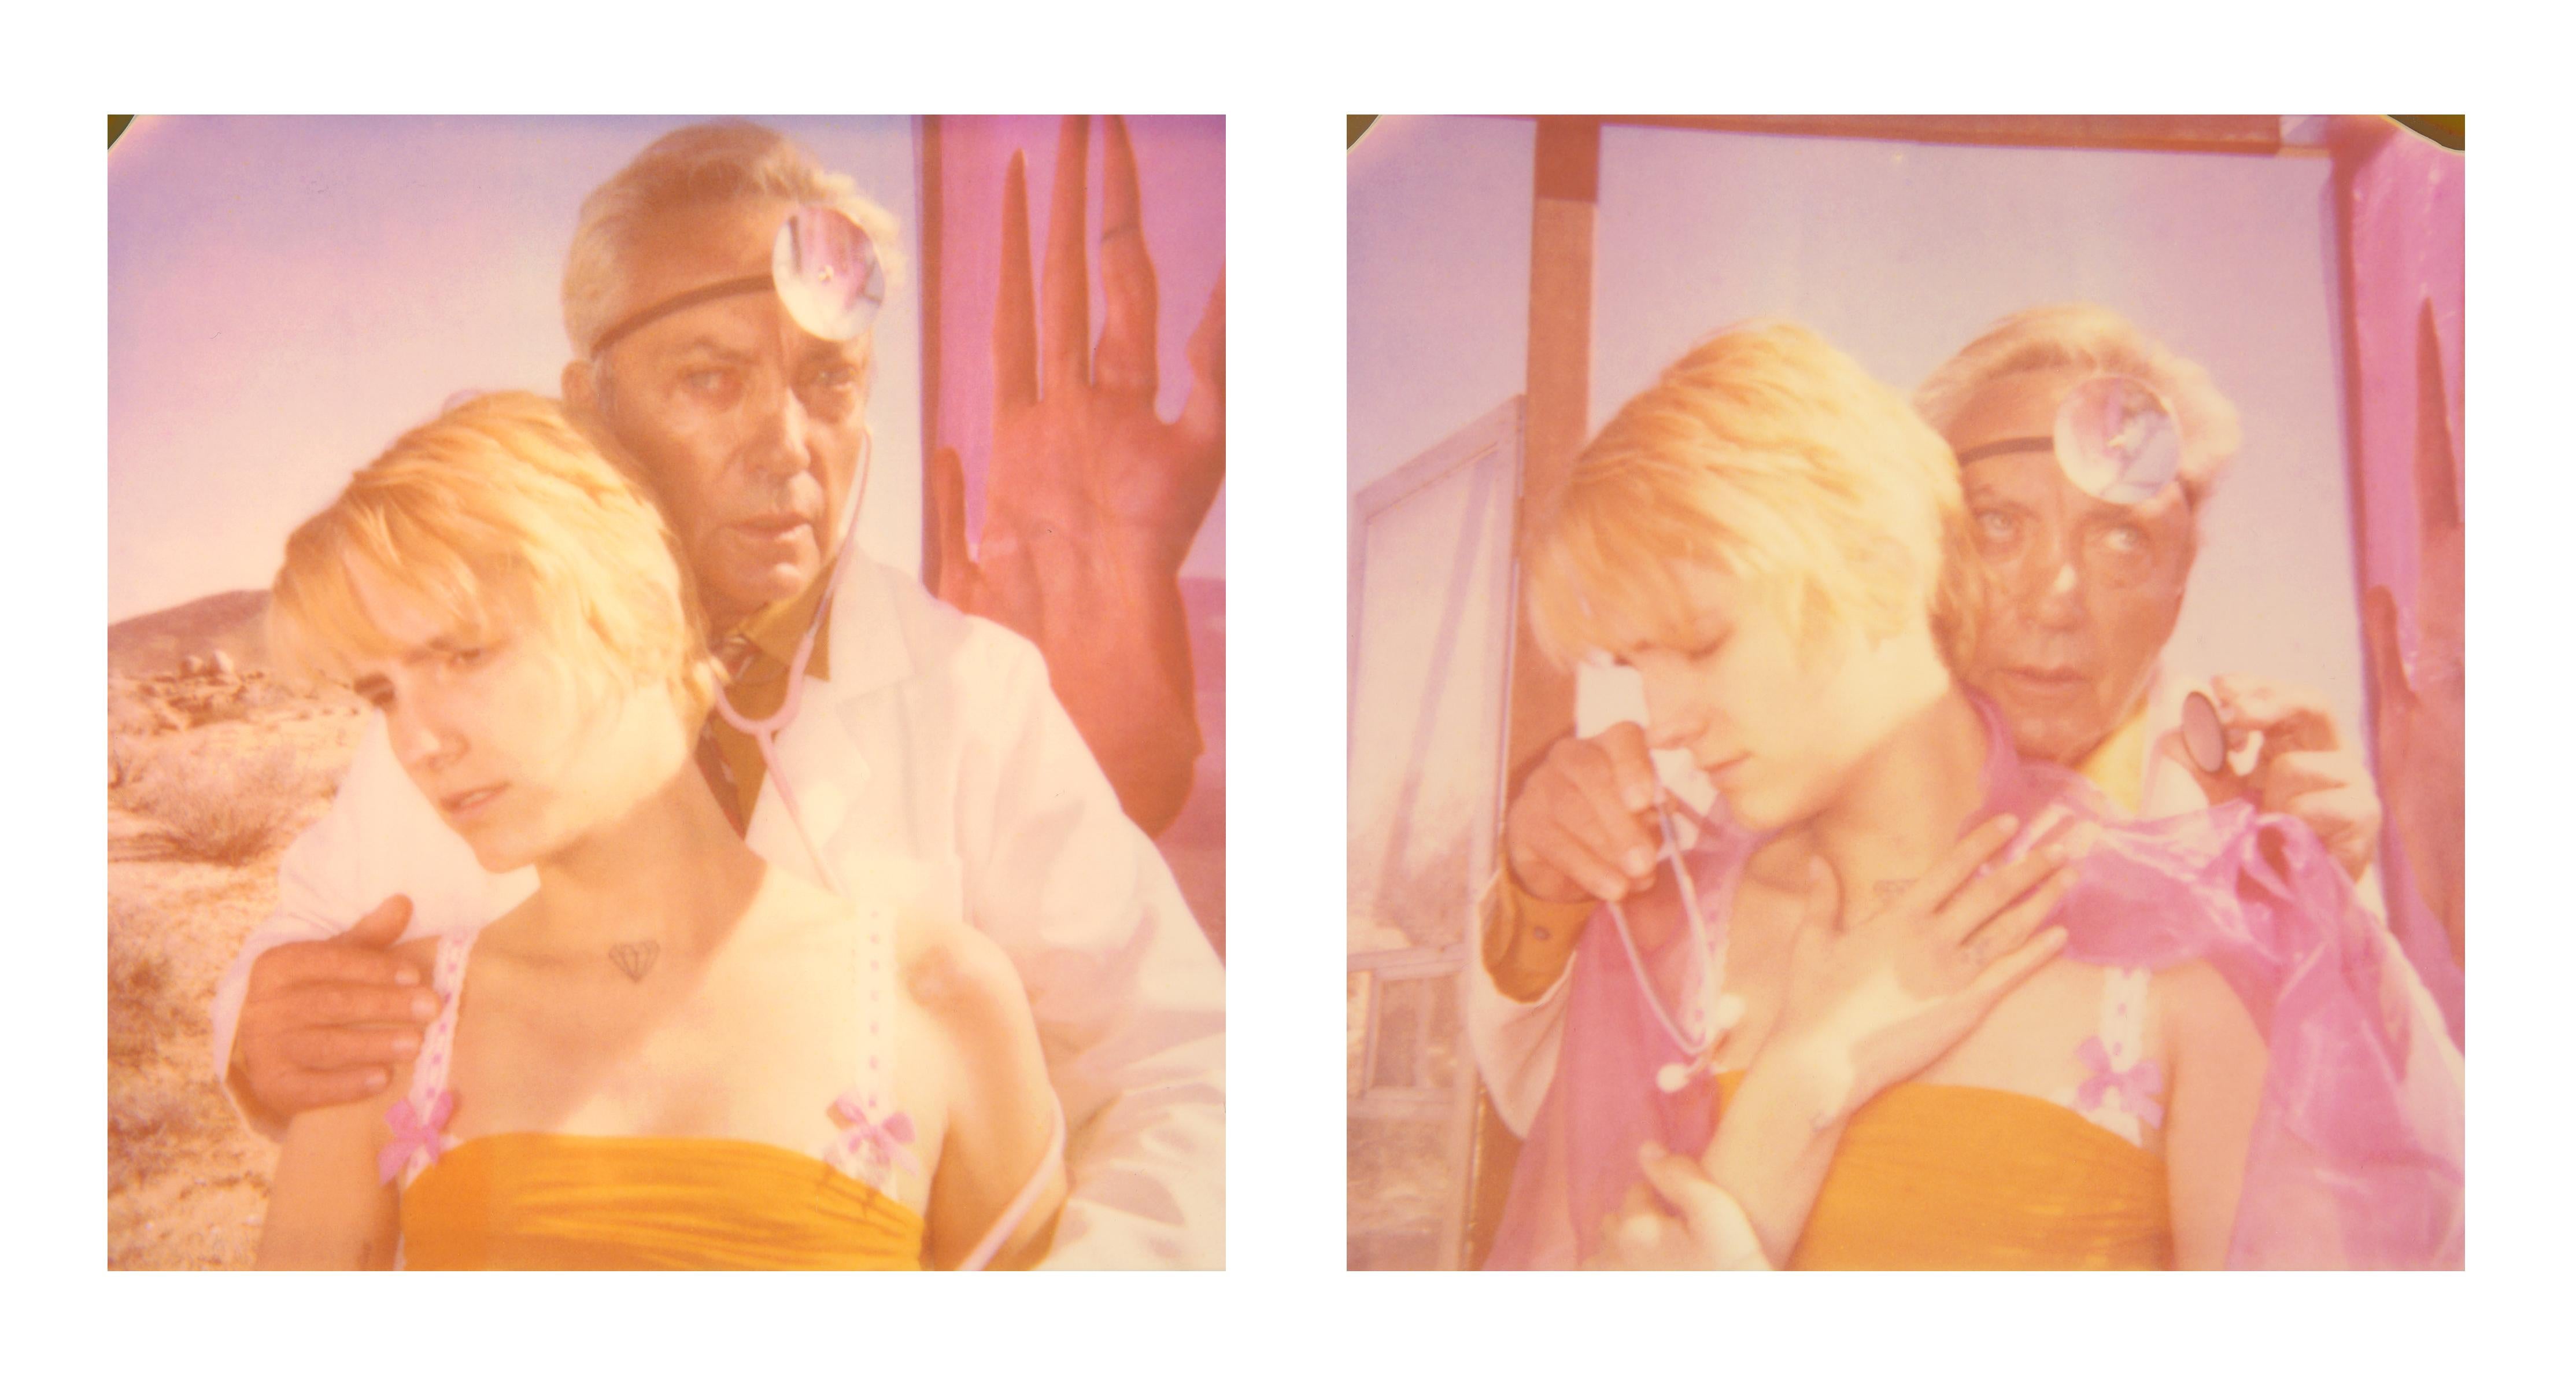 Hush, Little Baby, Don't Say a Word (Heather's Dream), diptych - 2013 
part of 